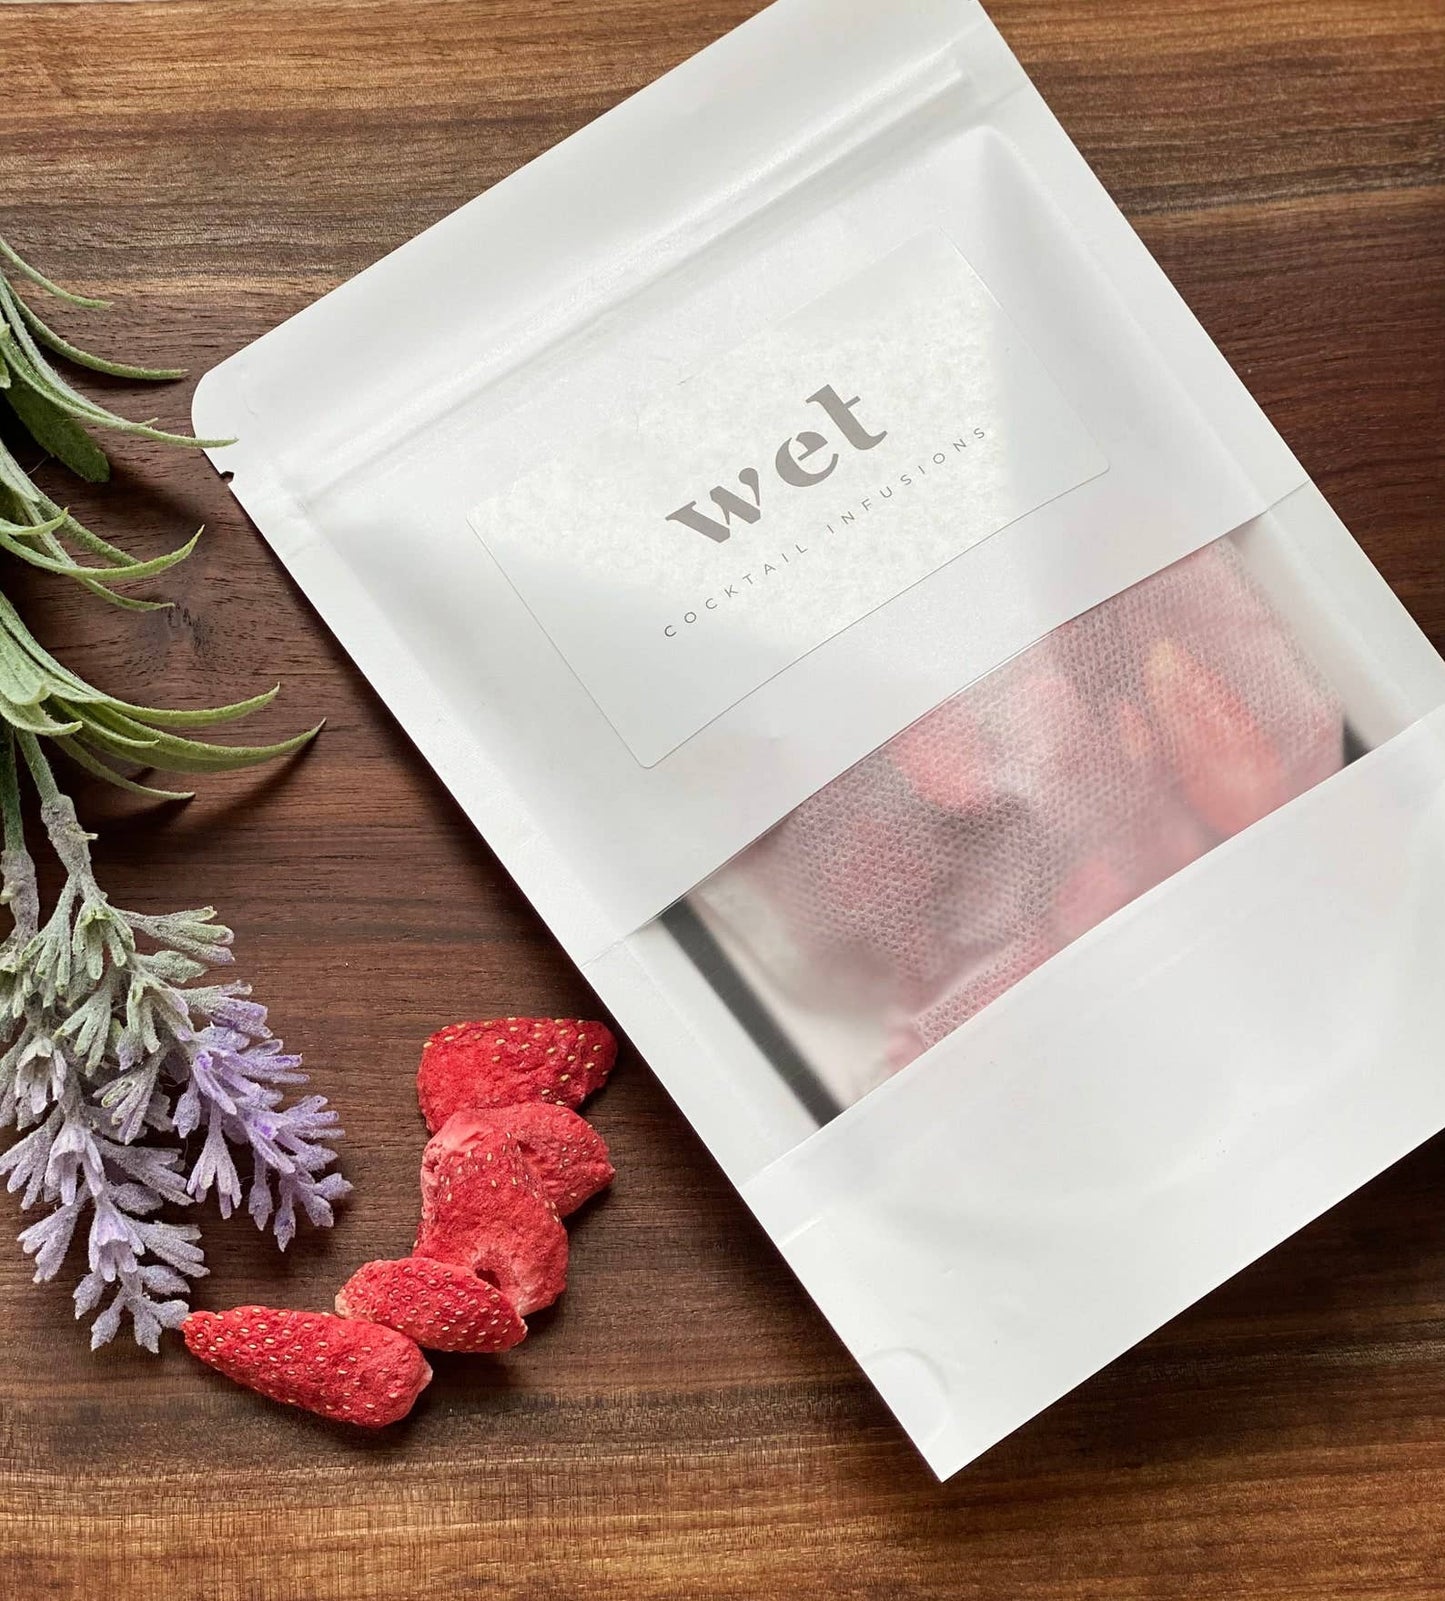 Wet Cocktail Infusions - Strawberry Lavender Alcohol Infusion Kit